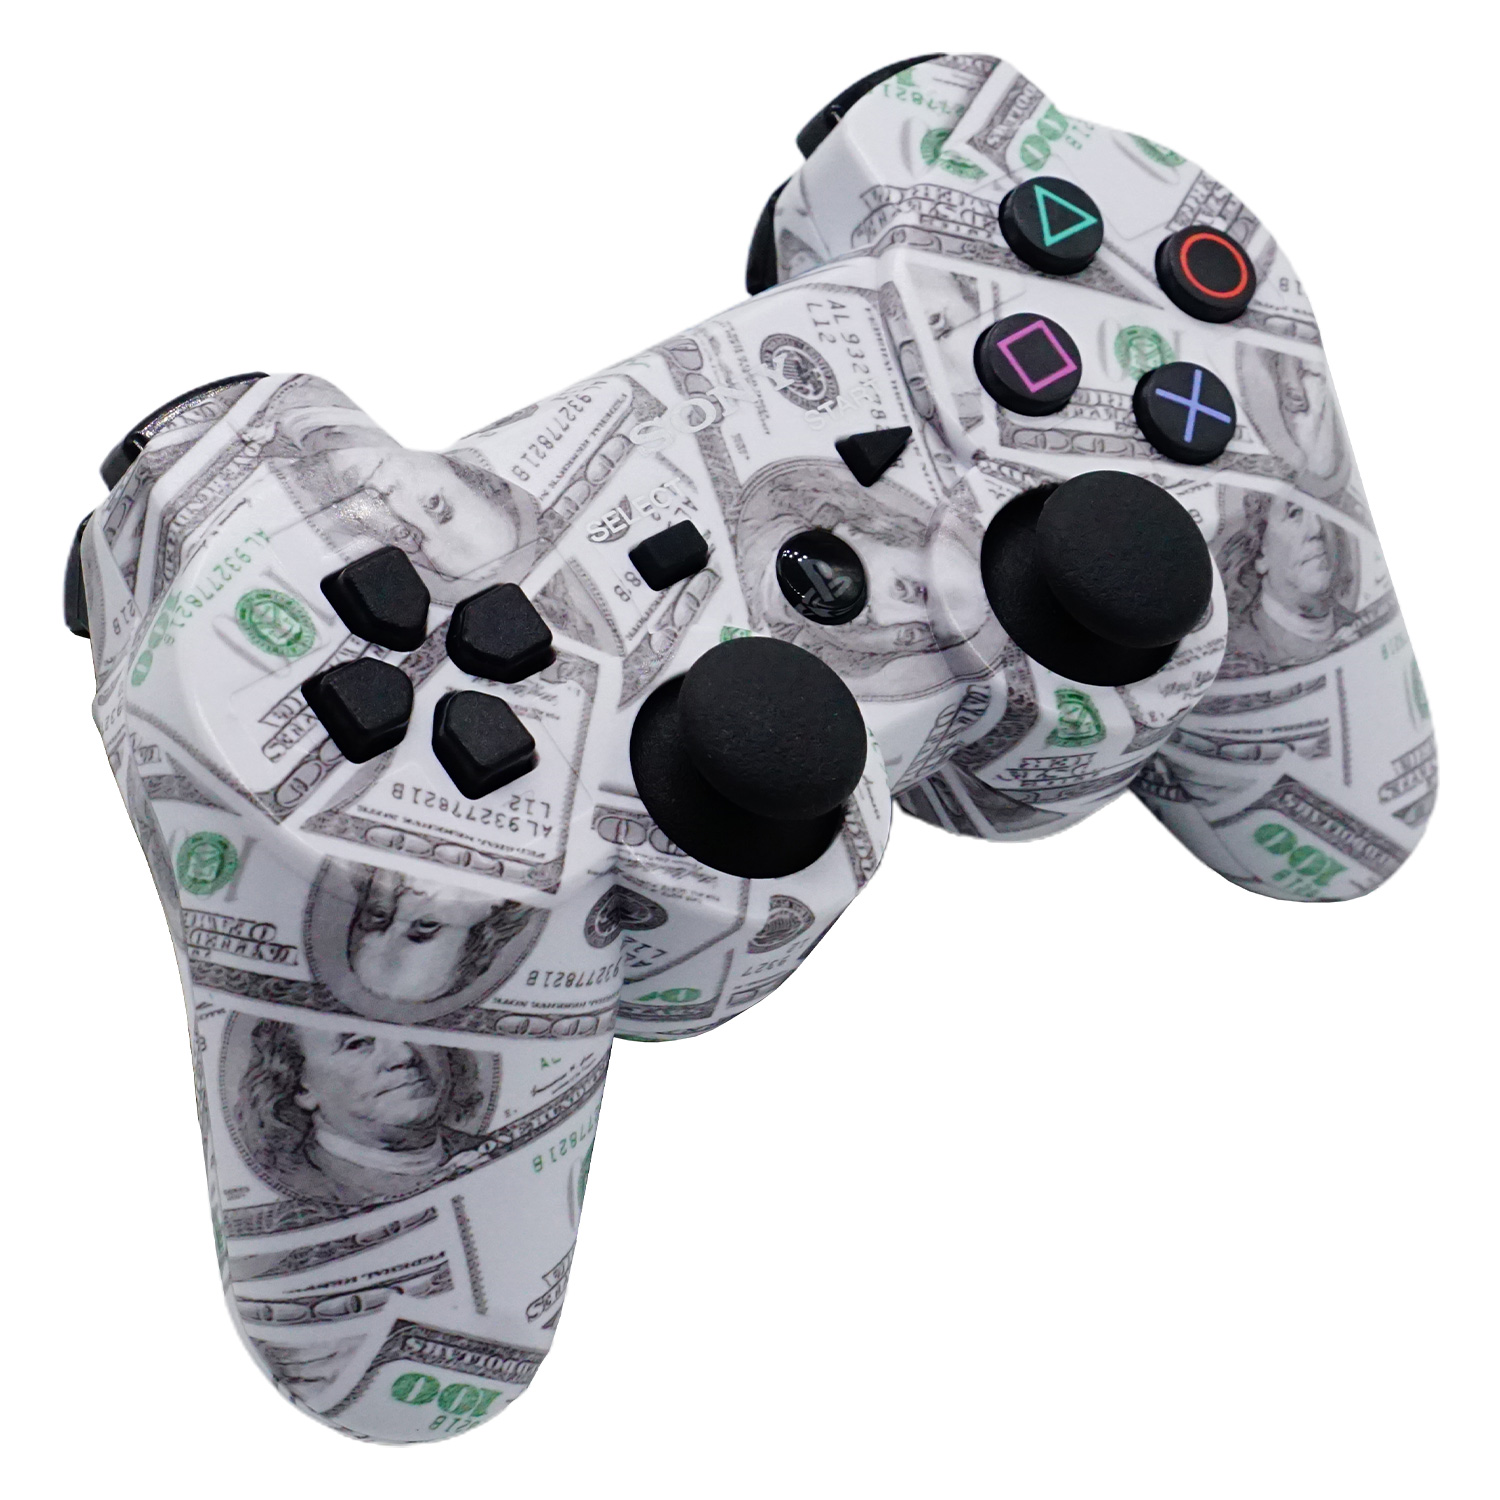 Controle Sony Dual Shock 3 PPP Dollar para PS3